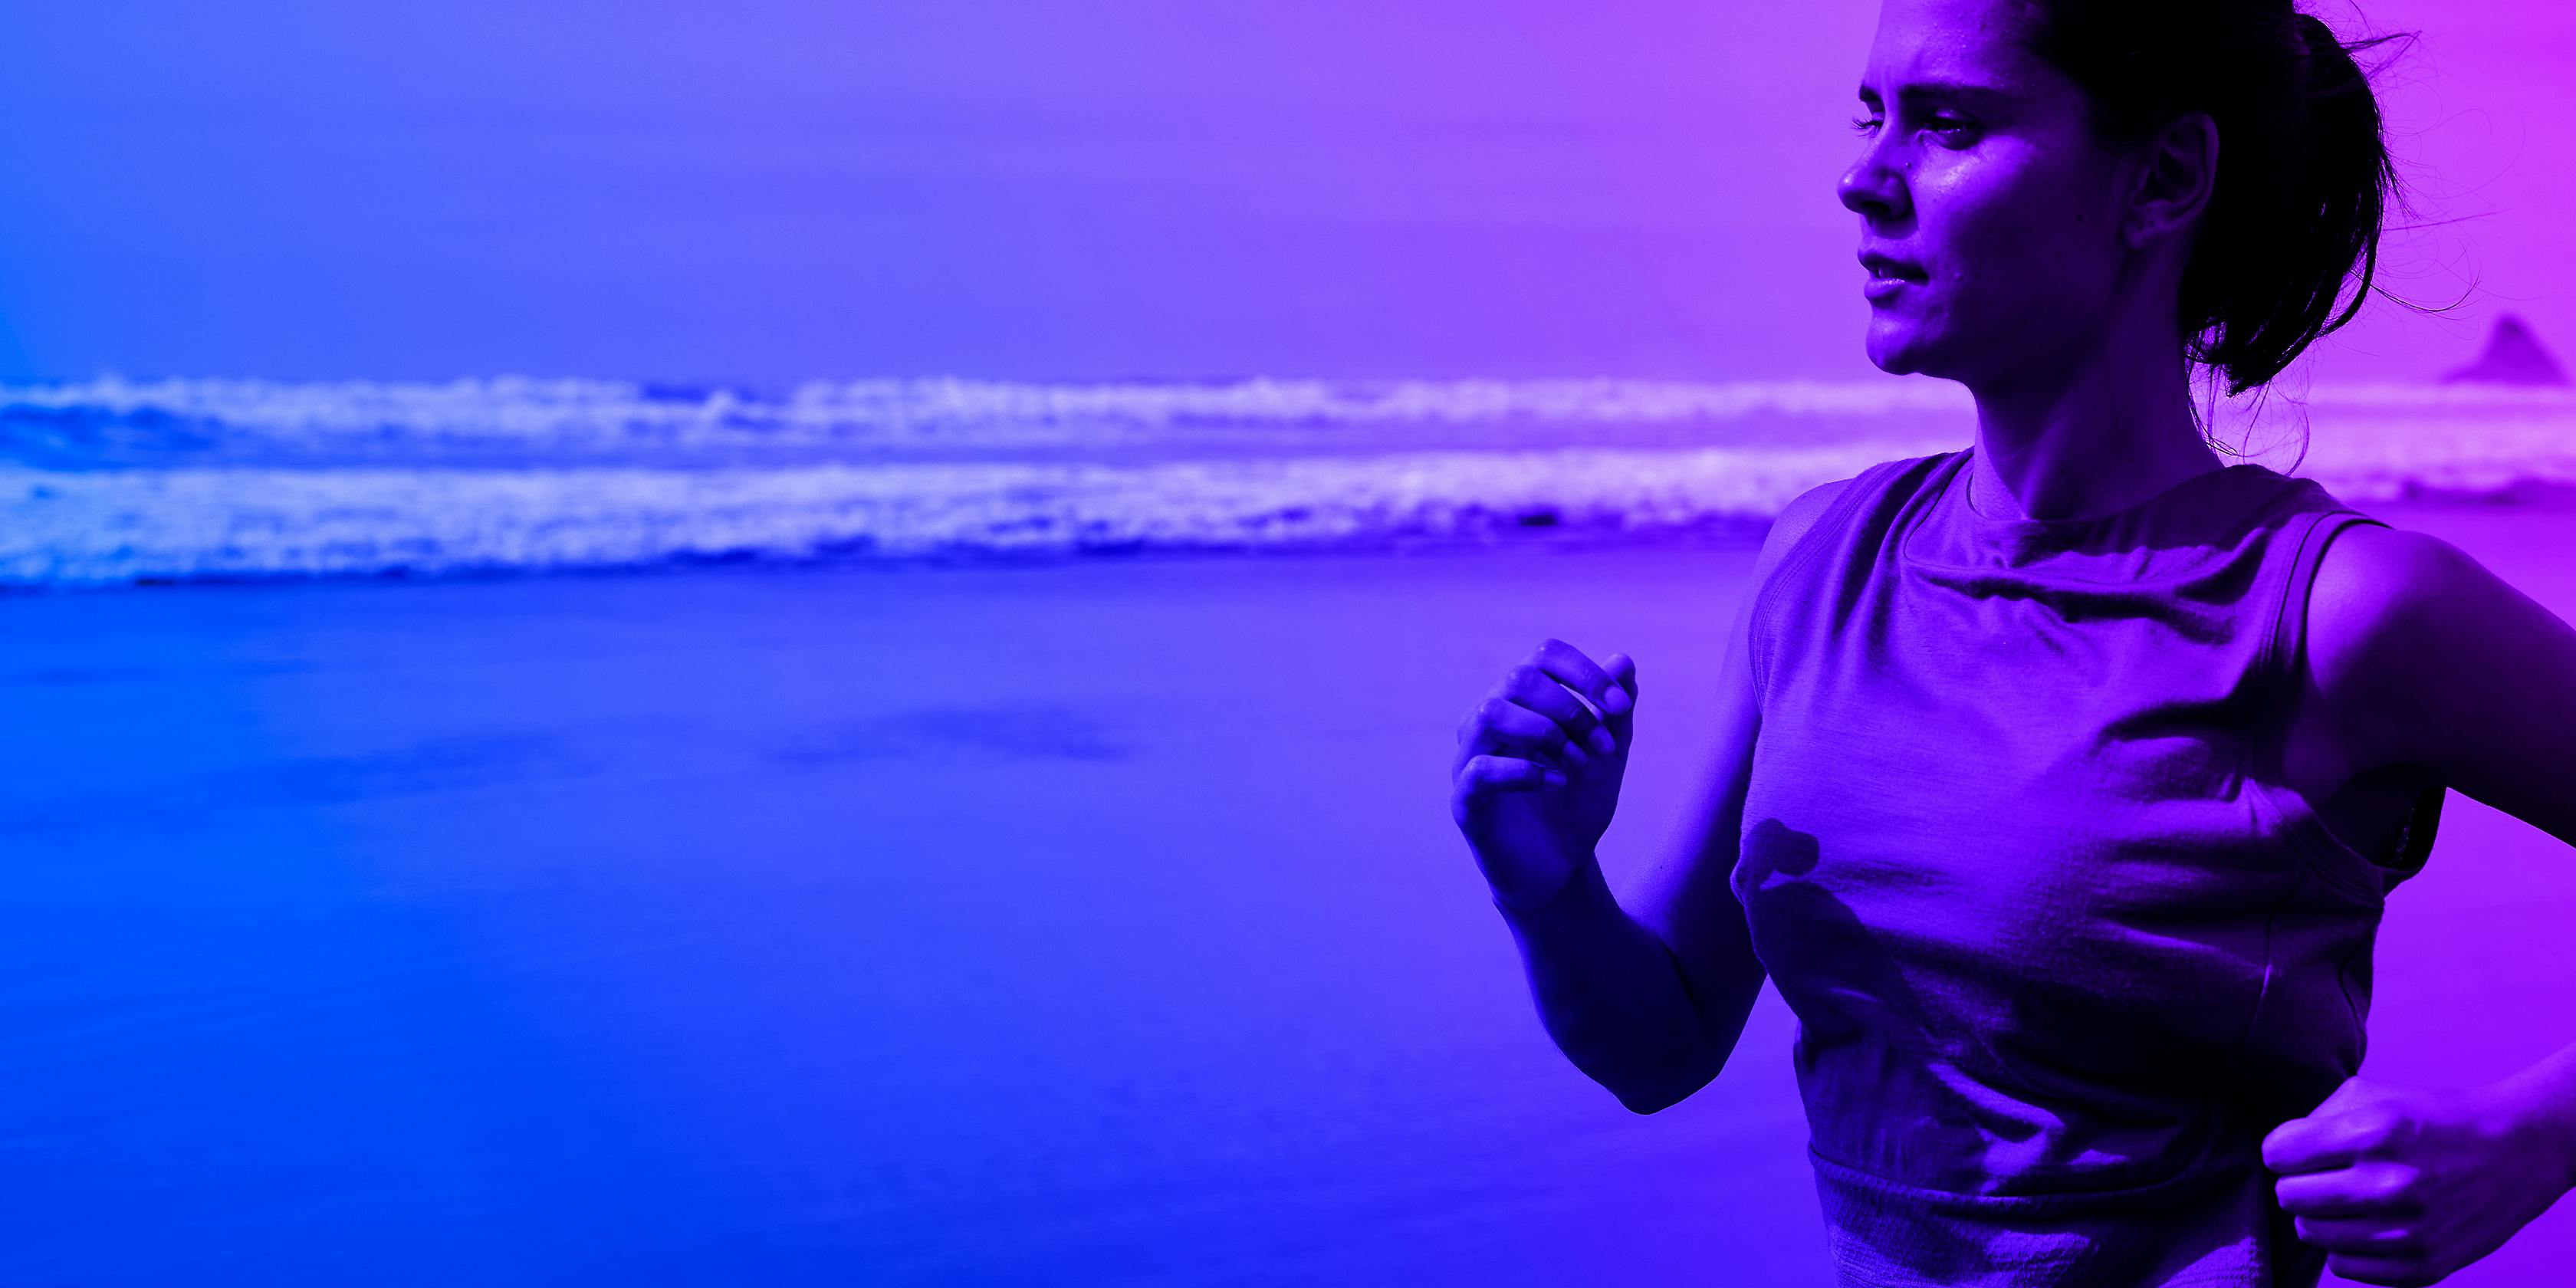 Lady running on beach with blue gradient filter